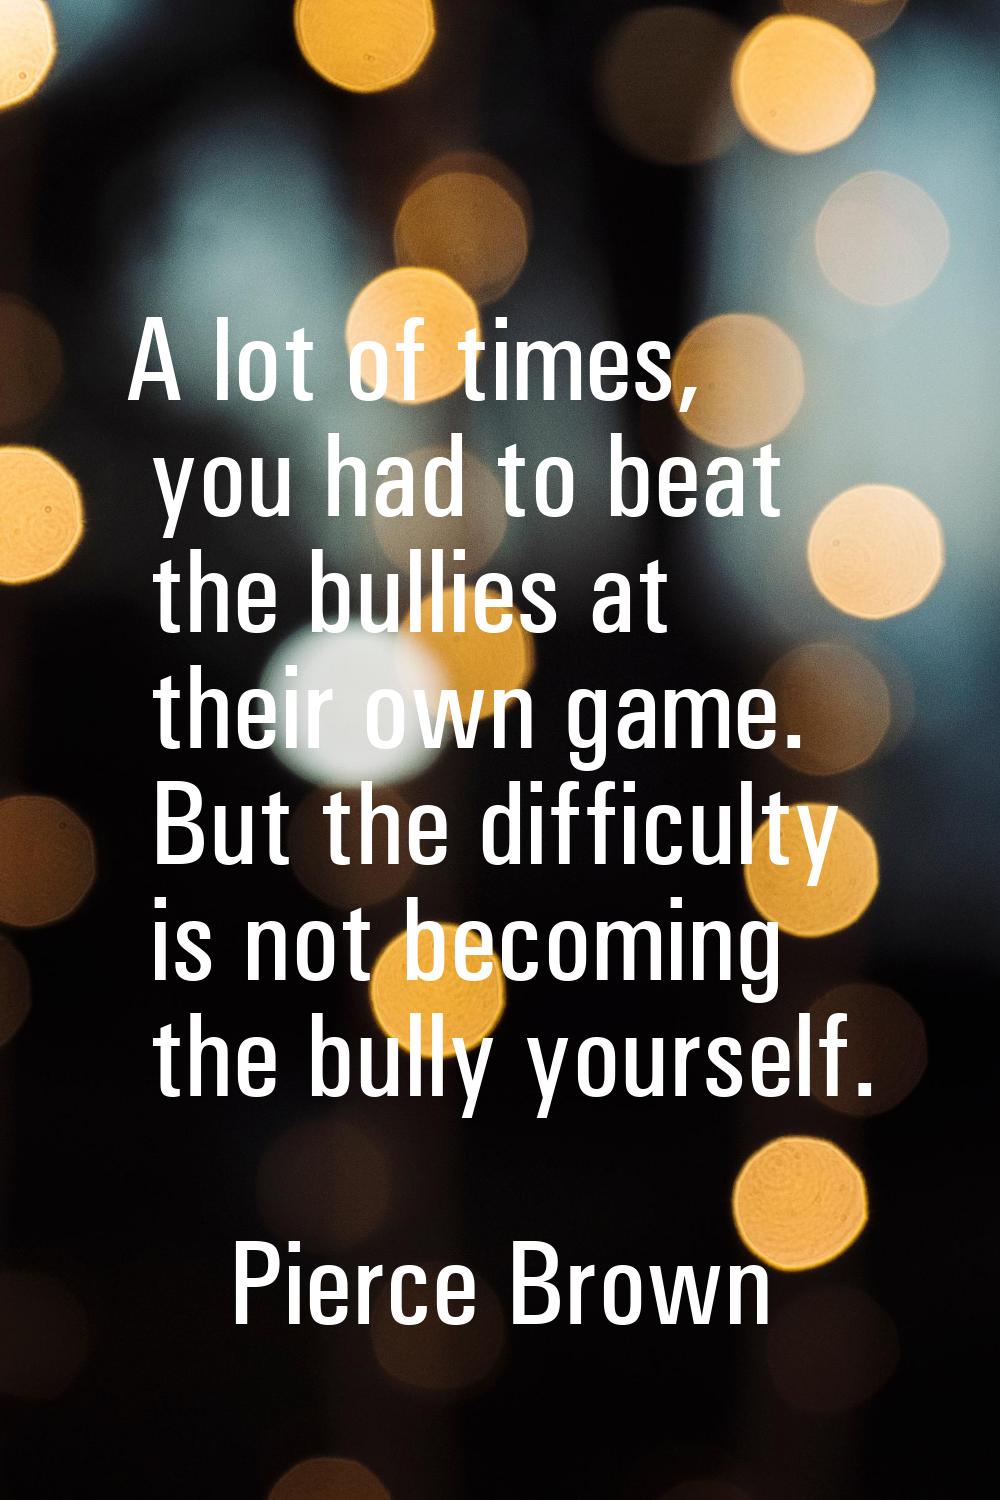 A lot of times, you had to beat the bullies at their own game. But the difficulty is not becoming t